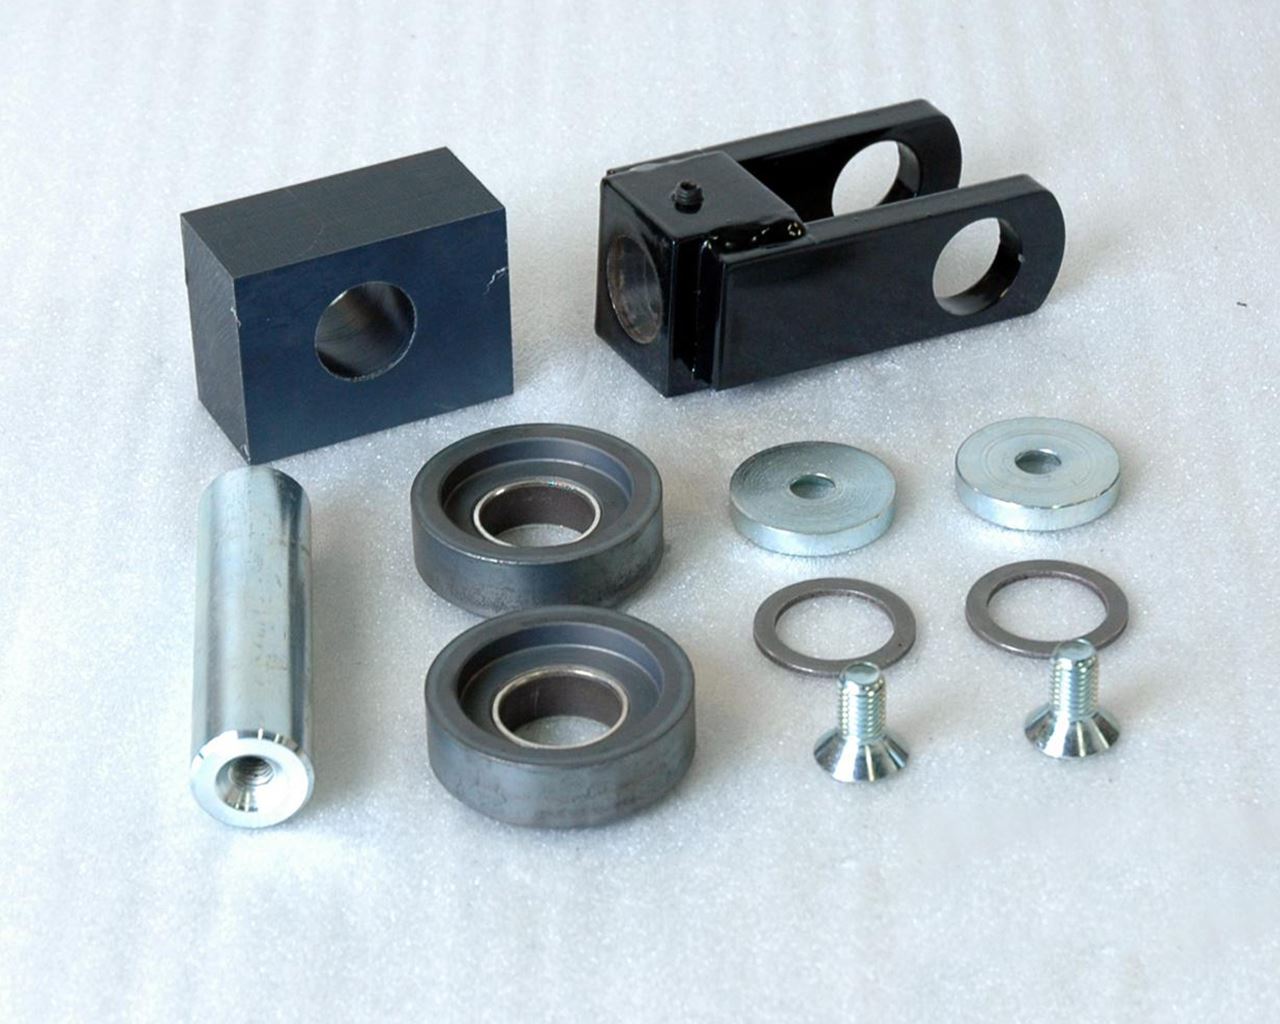 Lift table spare part - Wedged wheel kit TUB/TCB